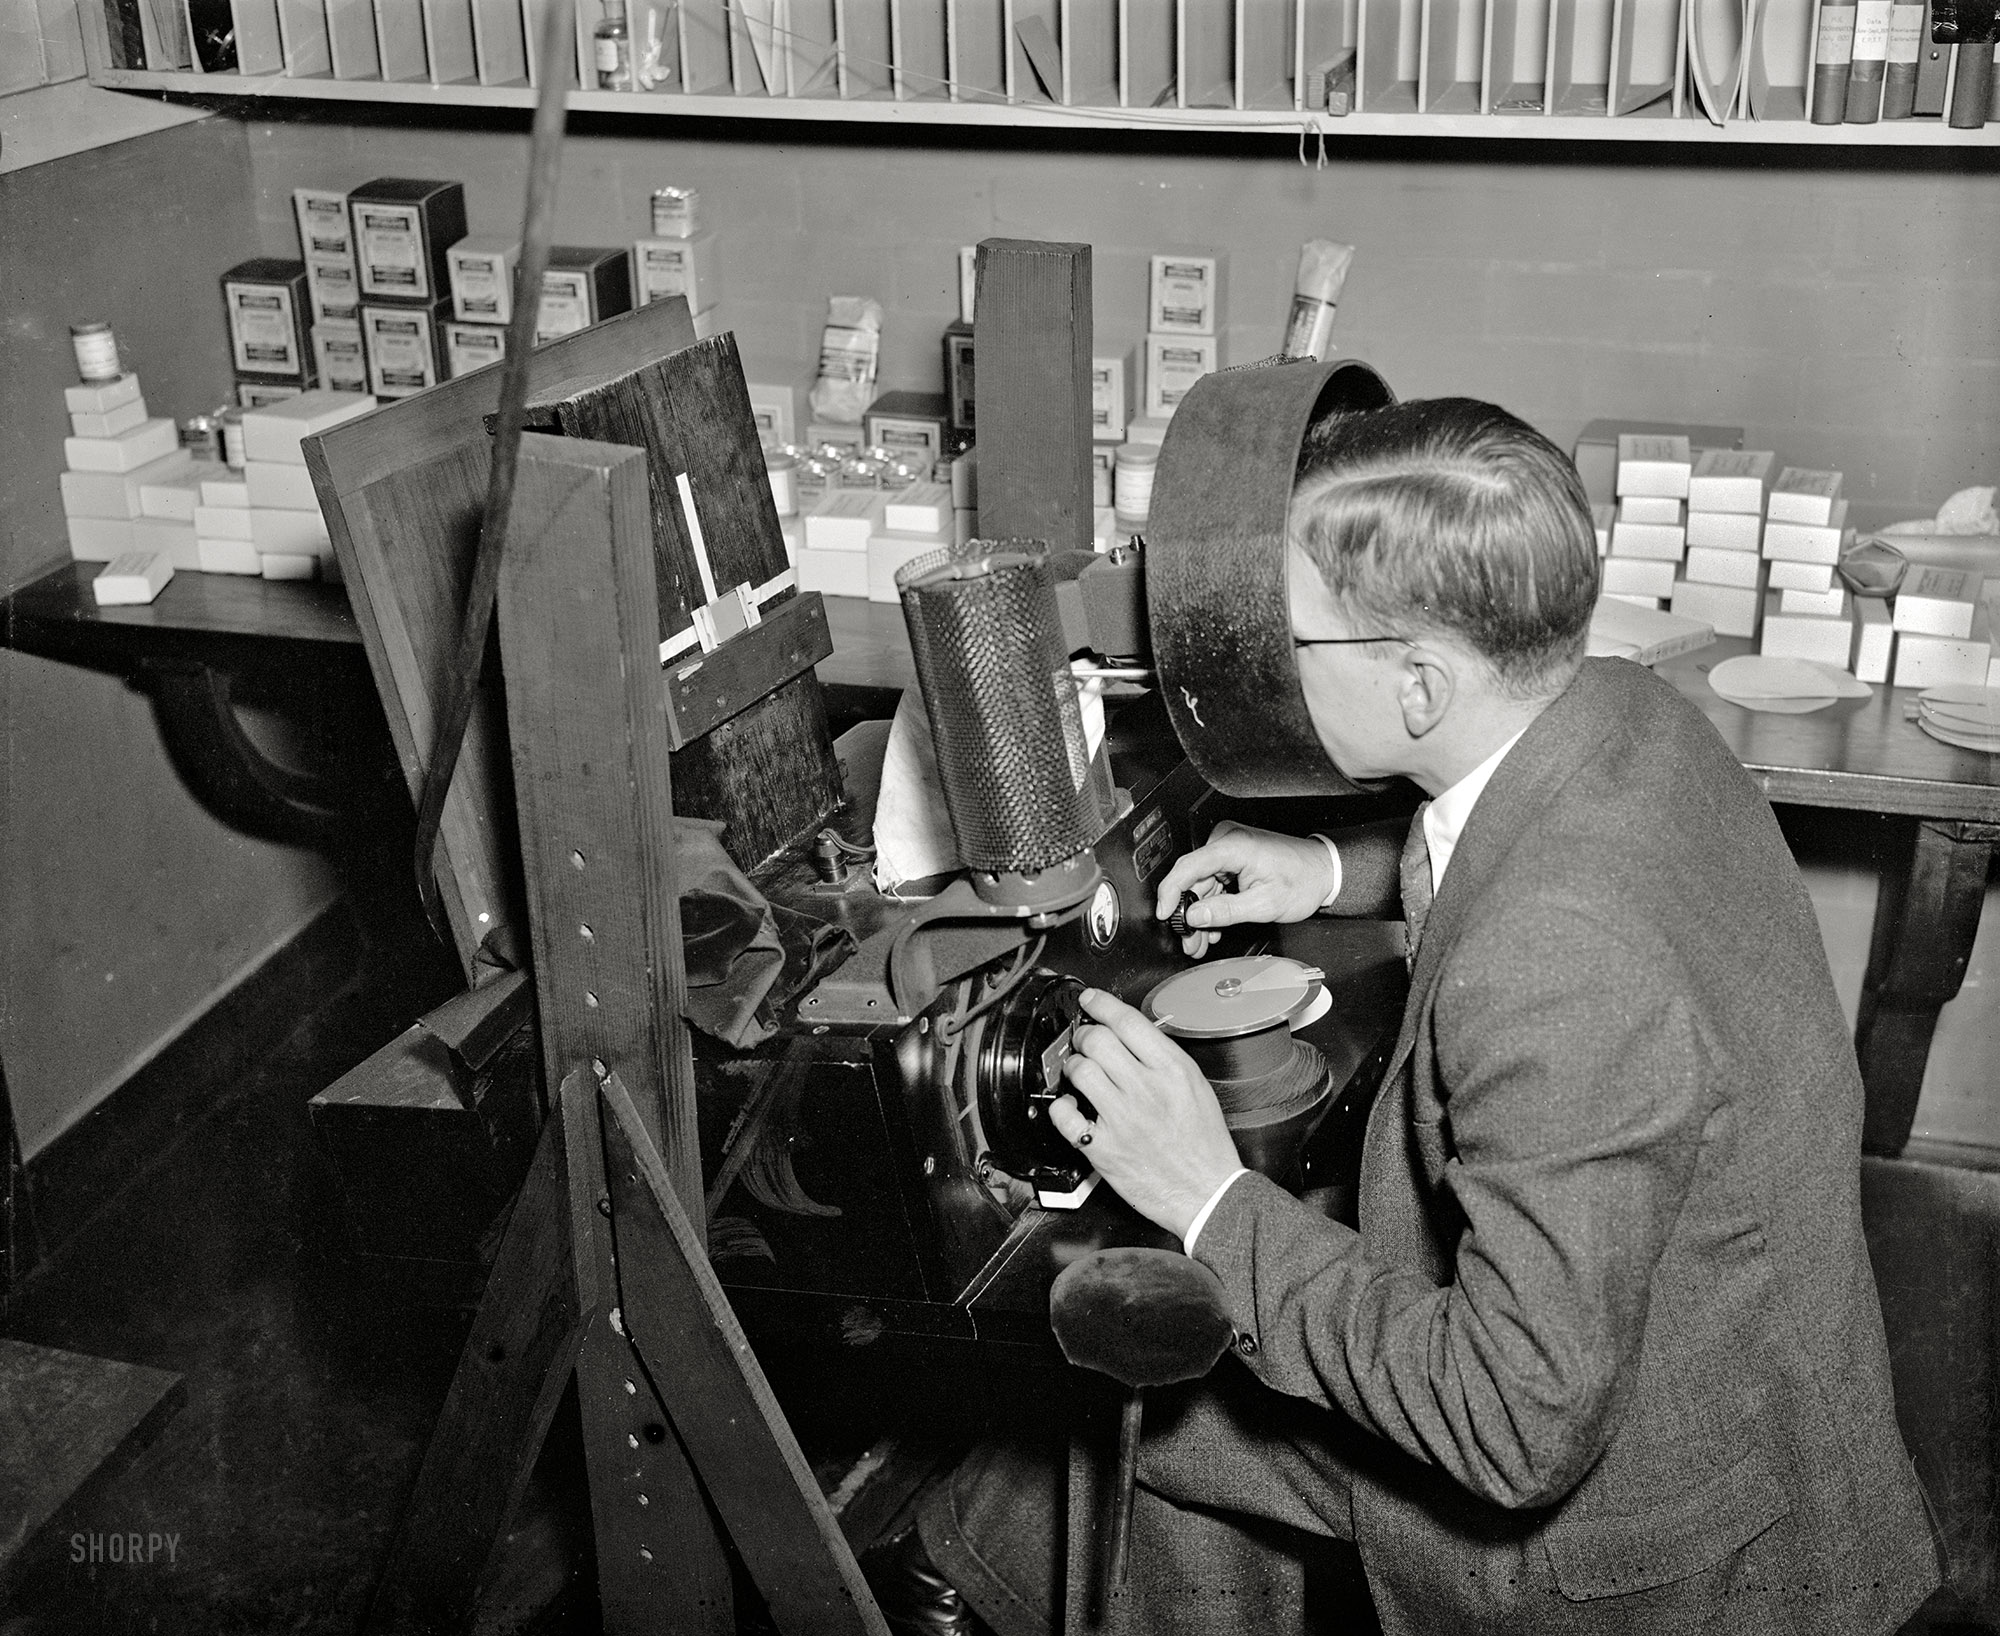 December 23, 1936. Washington, D.C. "Bureau of Standards. Standardization of card colors. Kenneth Kelley judging colors of dyes." Whatever you labor at, Shorpy wishes you a happy Labor Day. Harris & Ewing glass negative. View full size.